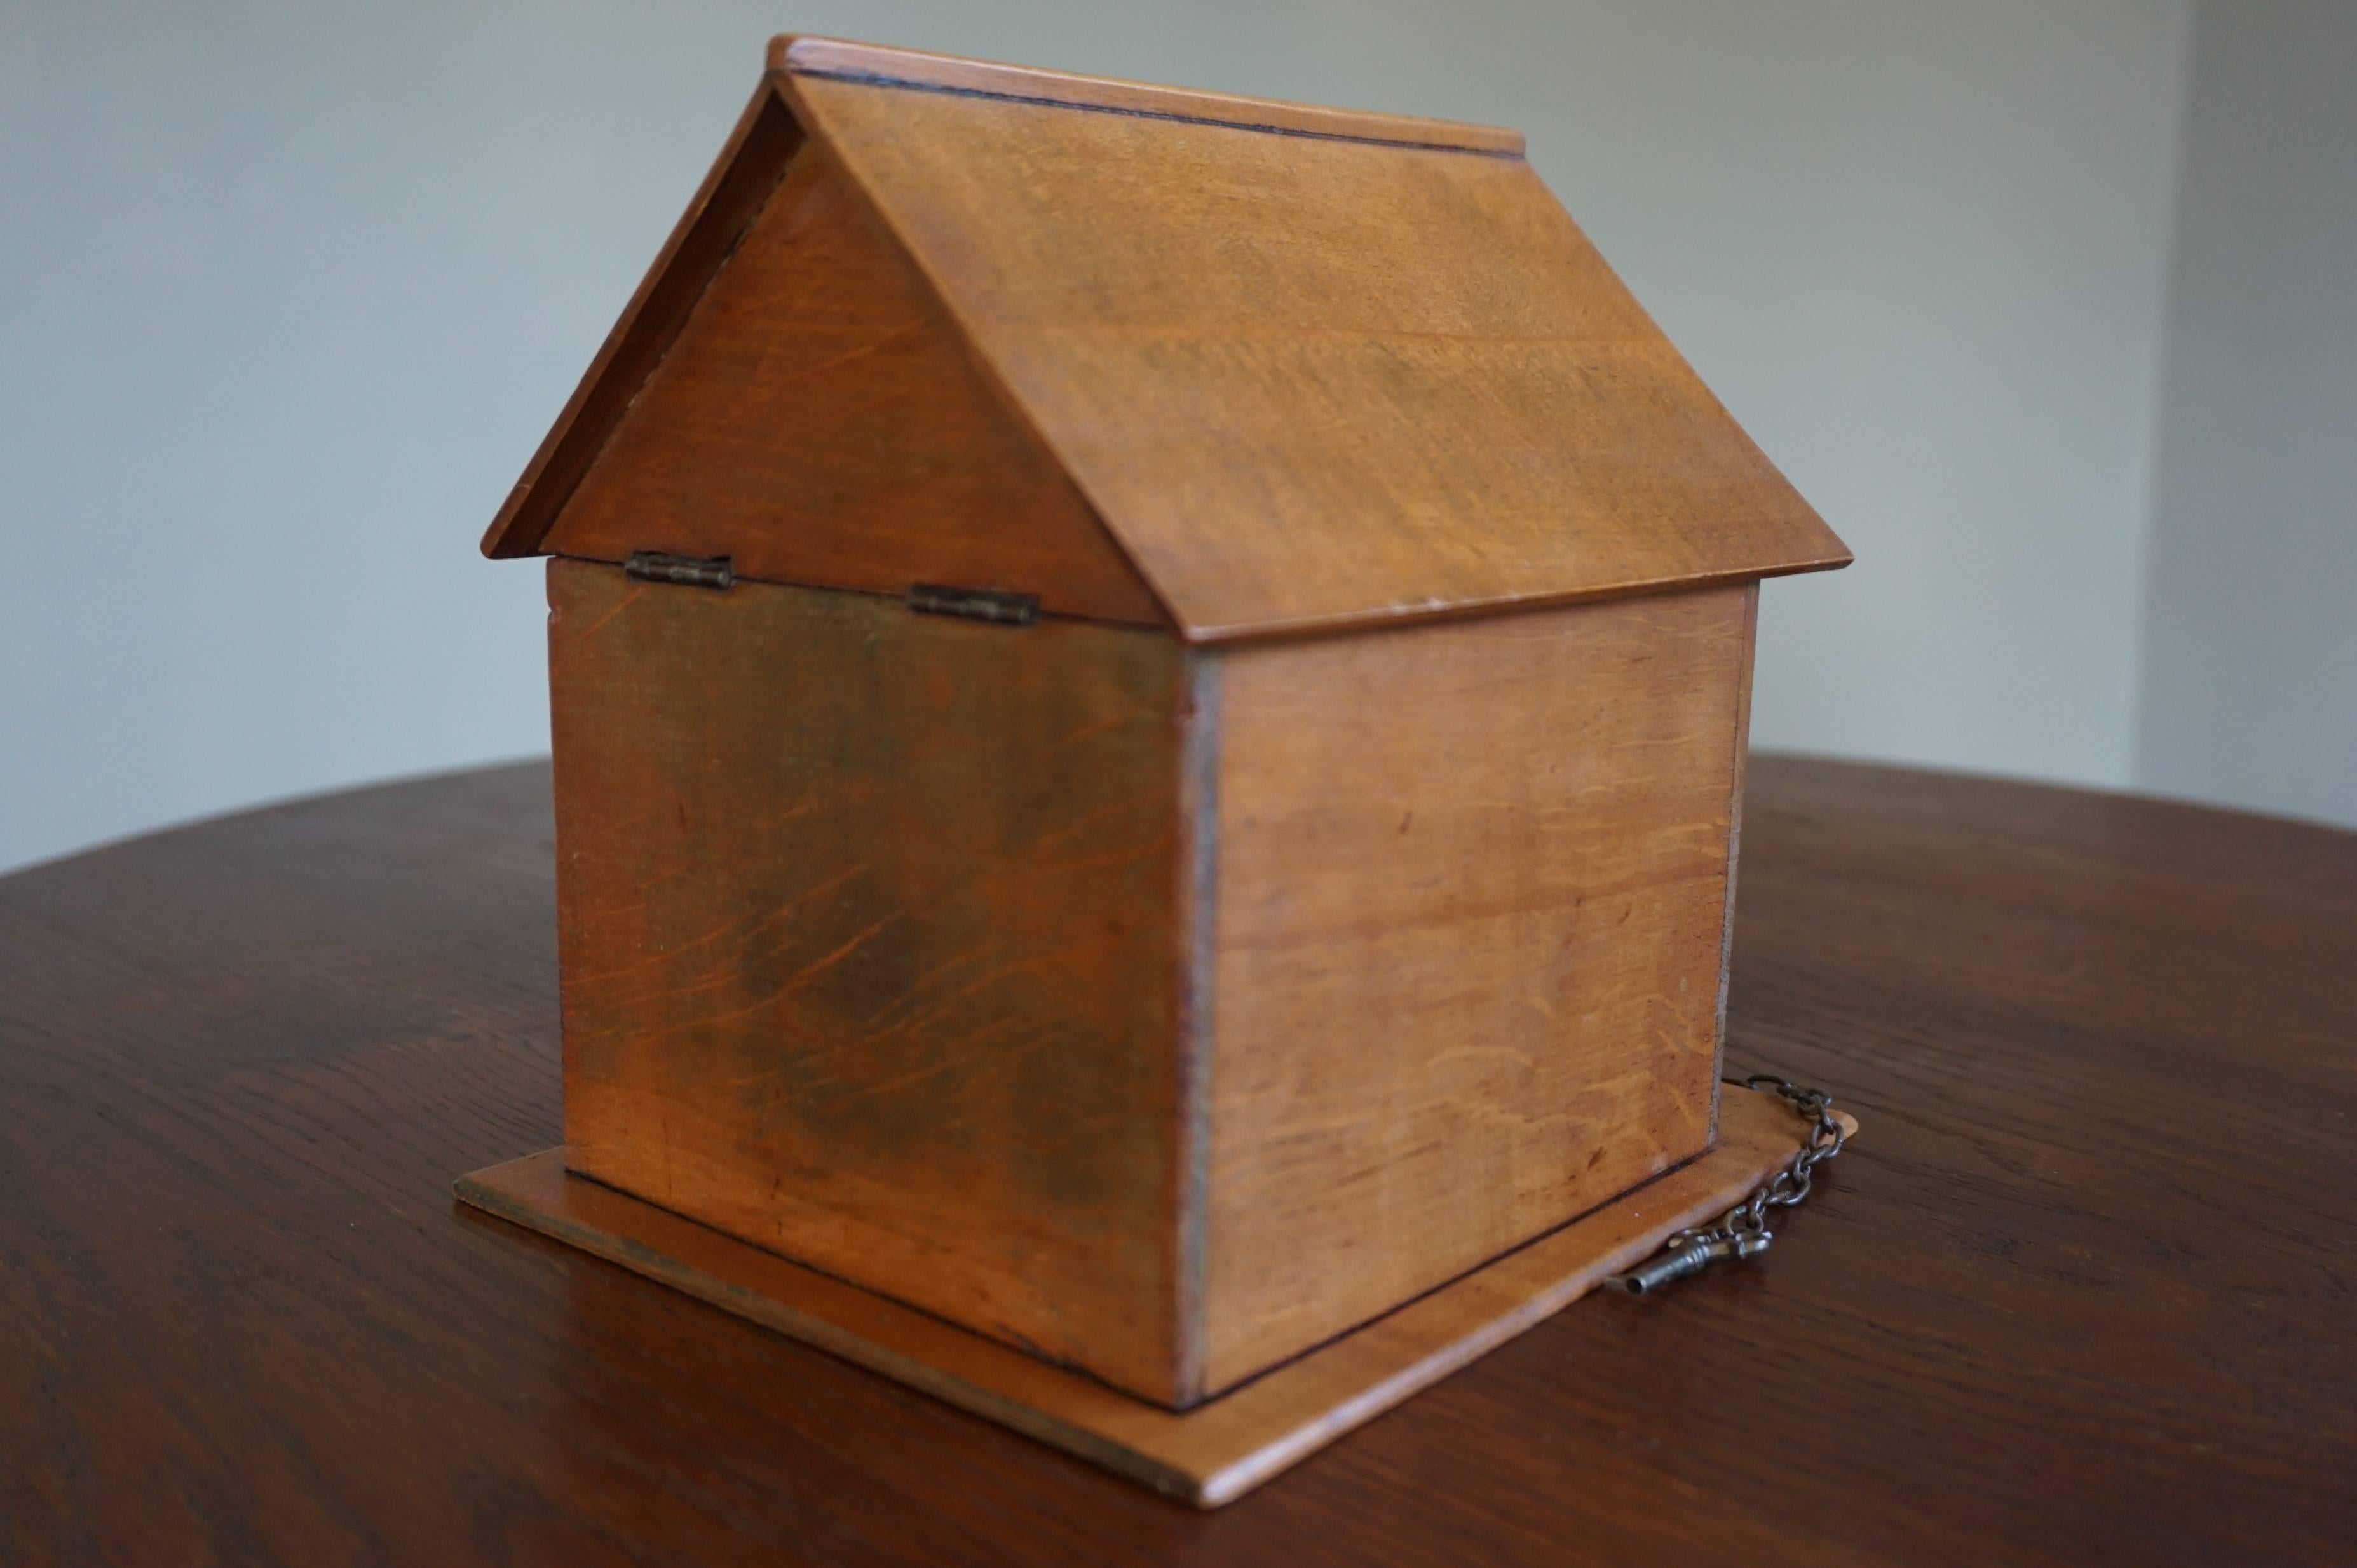 Coolest and All Handcrafted Early 20th Century Wooden Doghouse and Dog Cigar Box 8